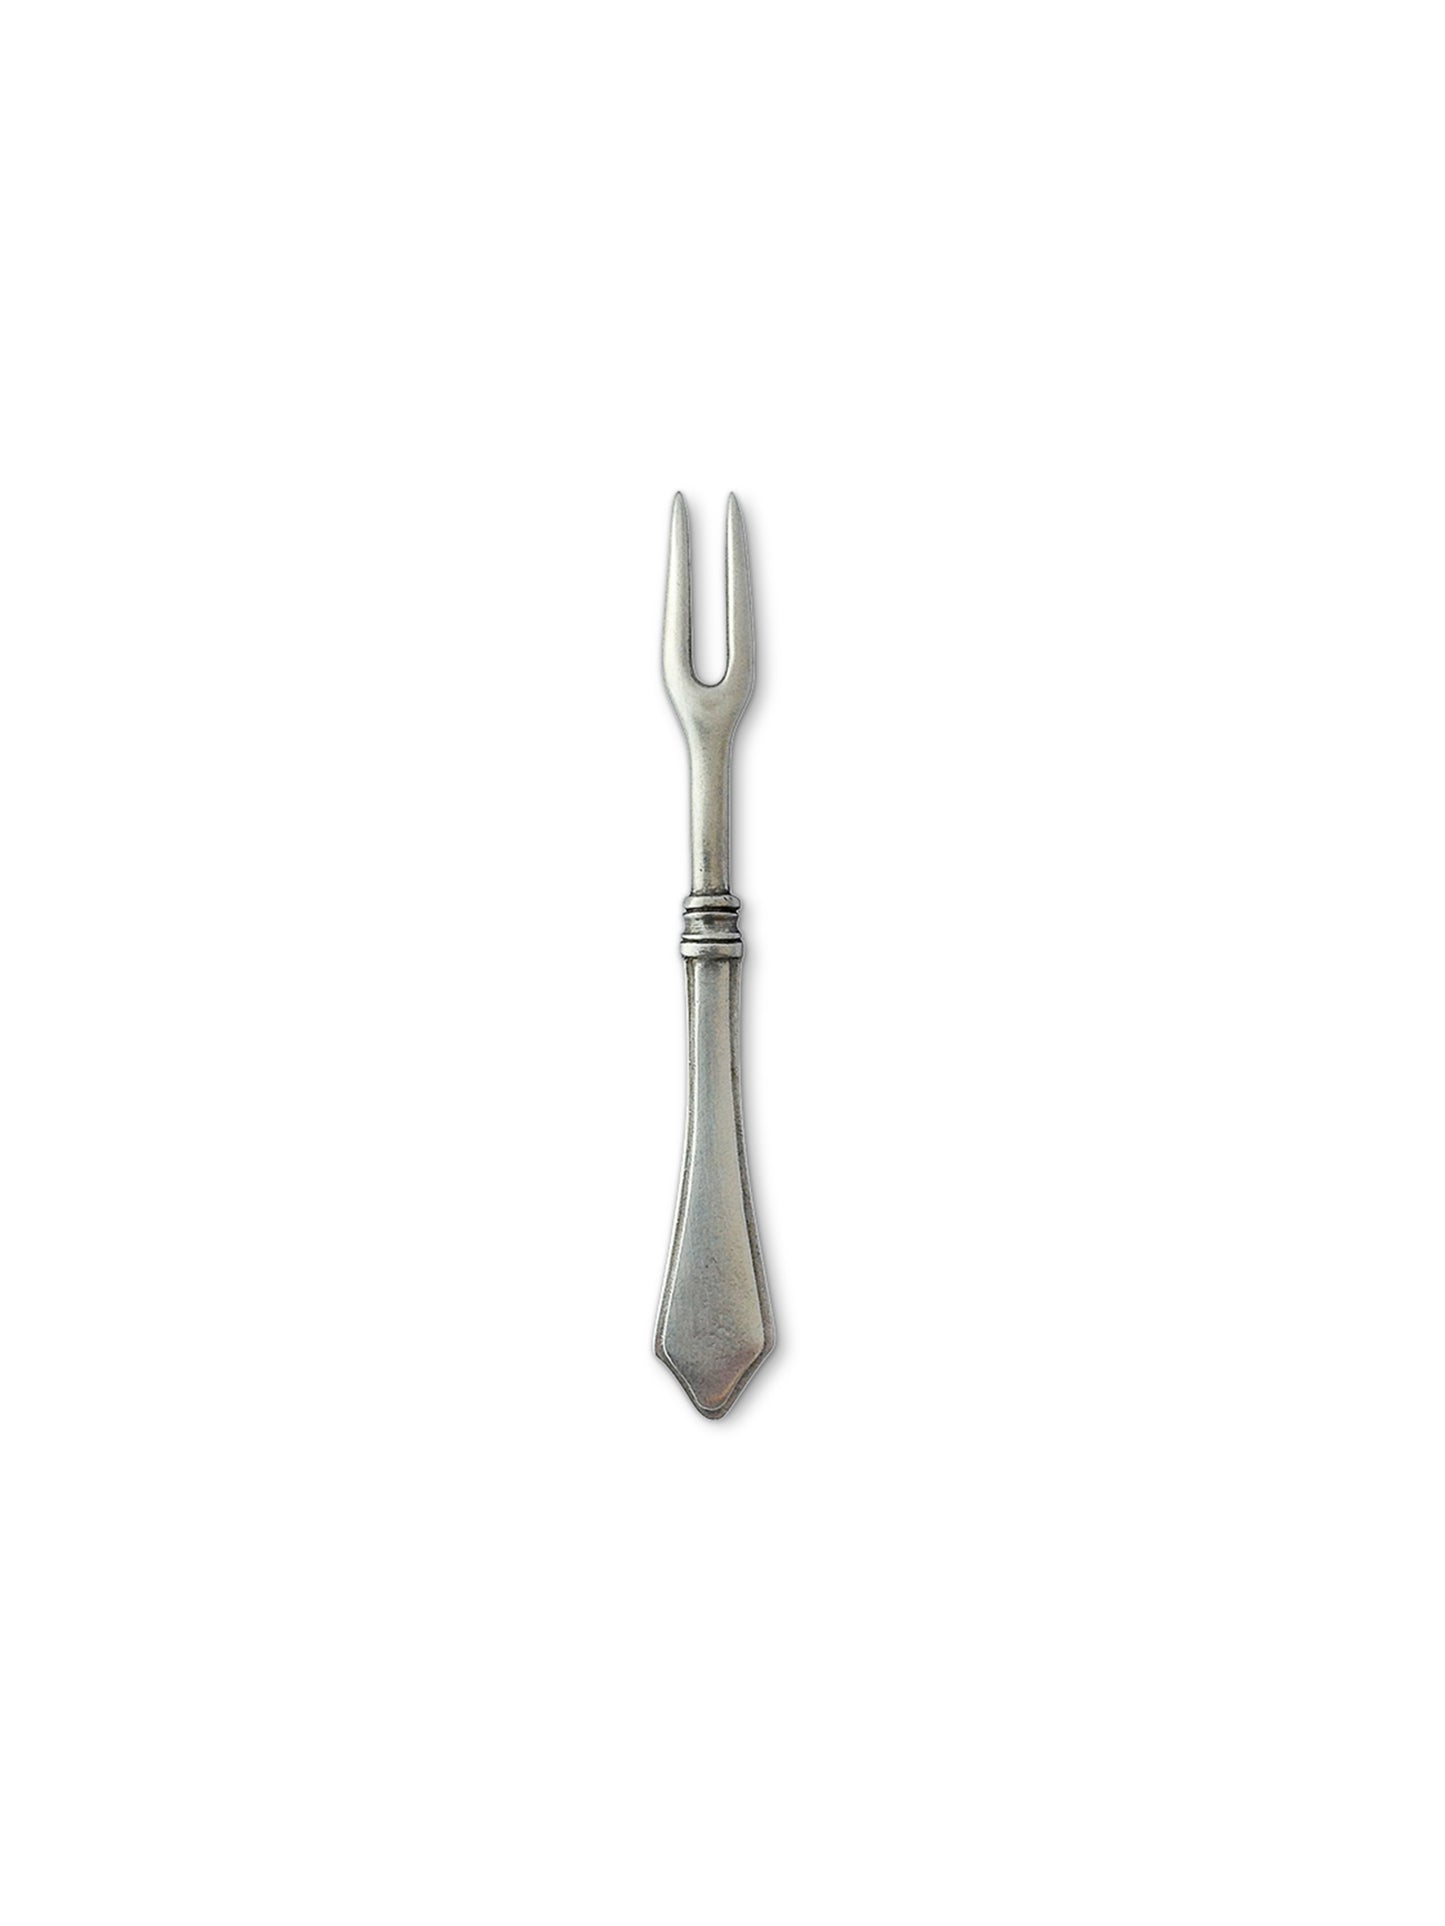 MATCH Pewter Violetta Cocktail Fork Weston Table